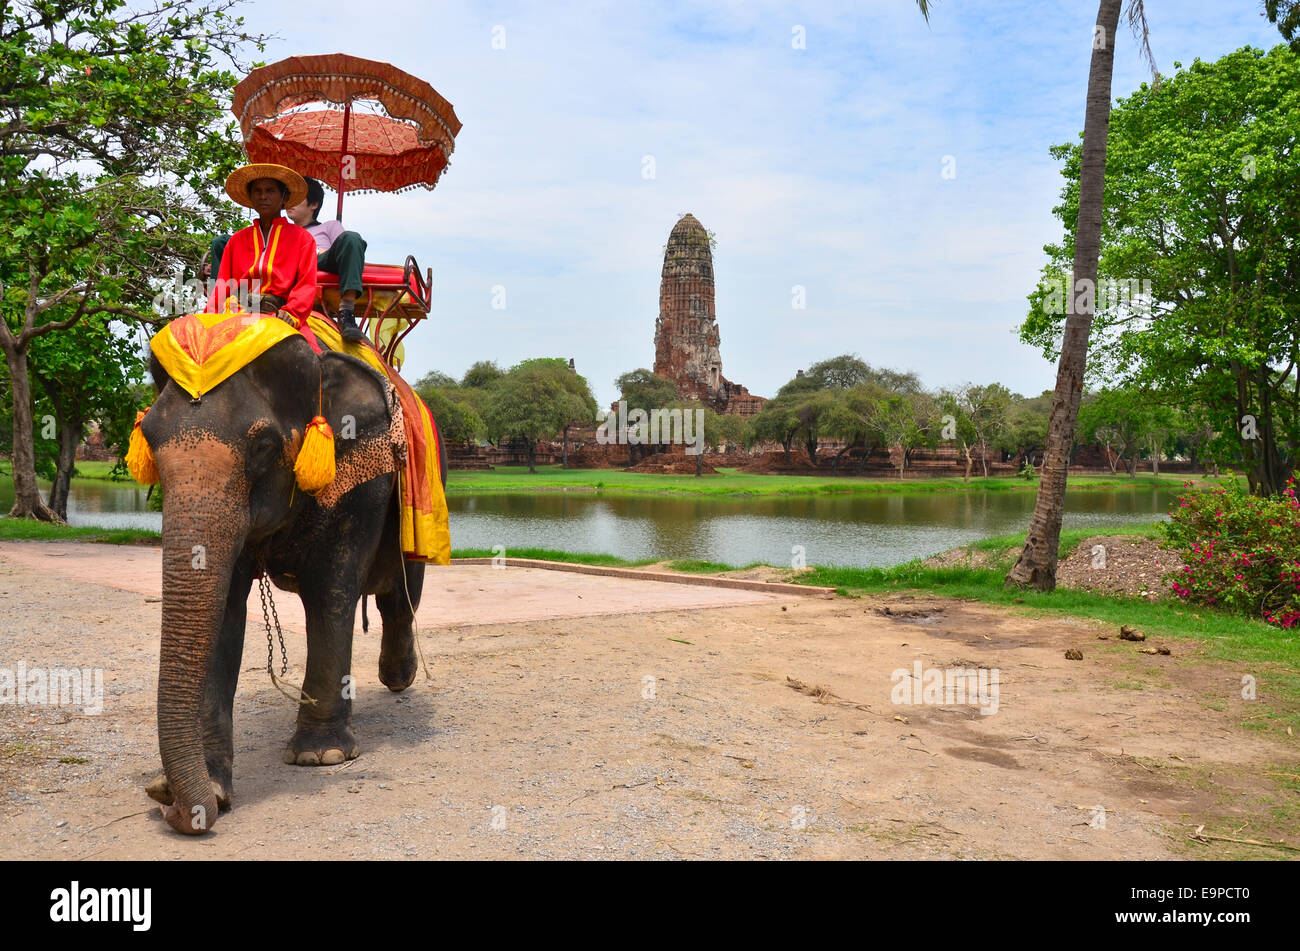 Seightseeing with elephant, Wat Mahathat temple, Ayutthaya, Thailand Stock Photo